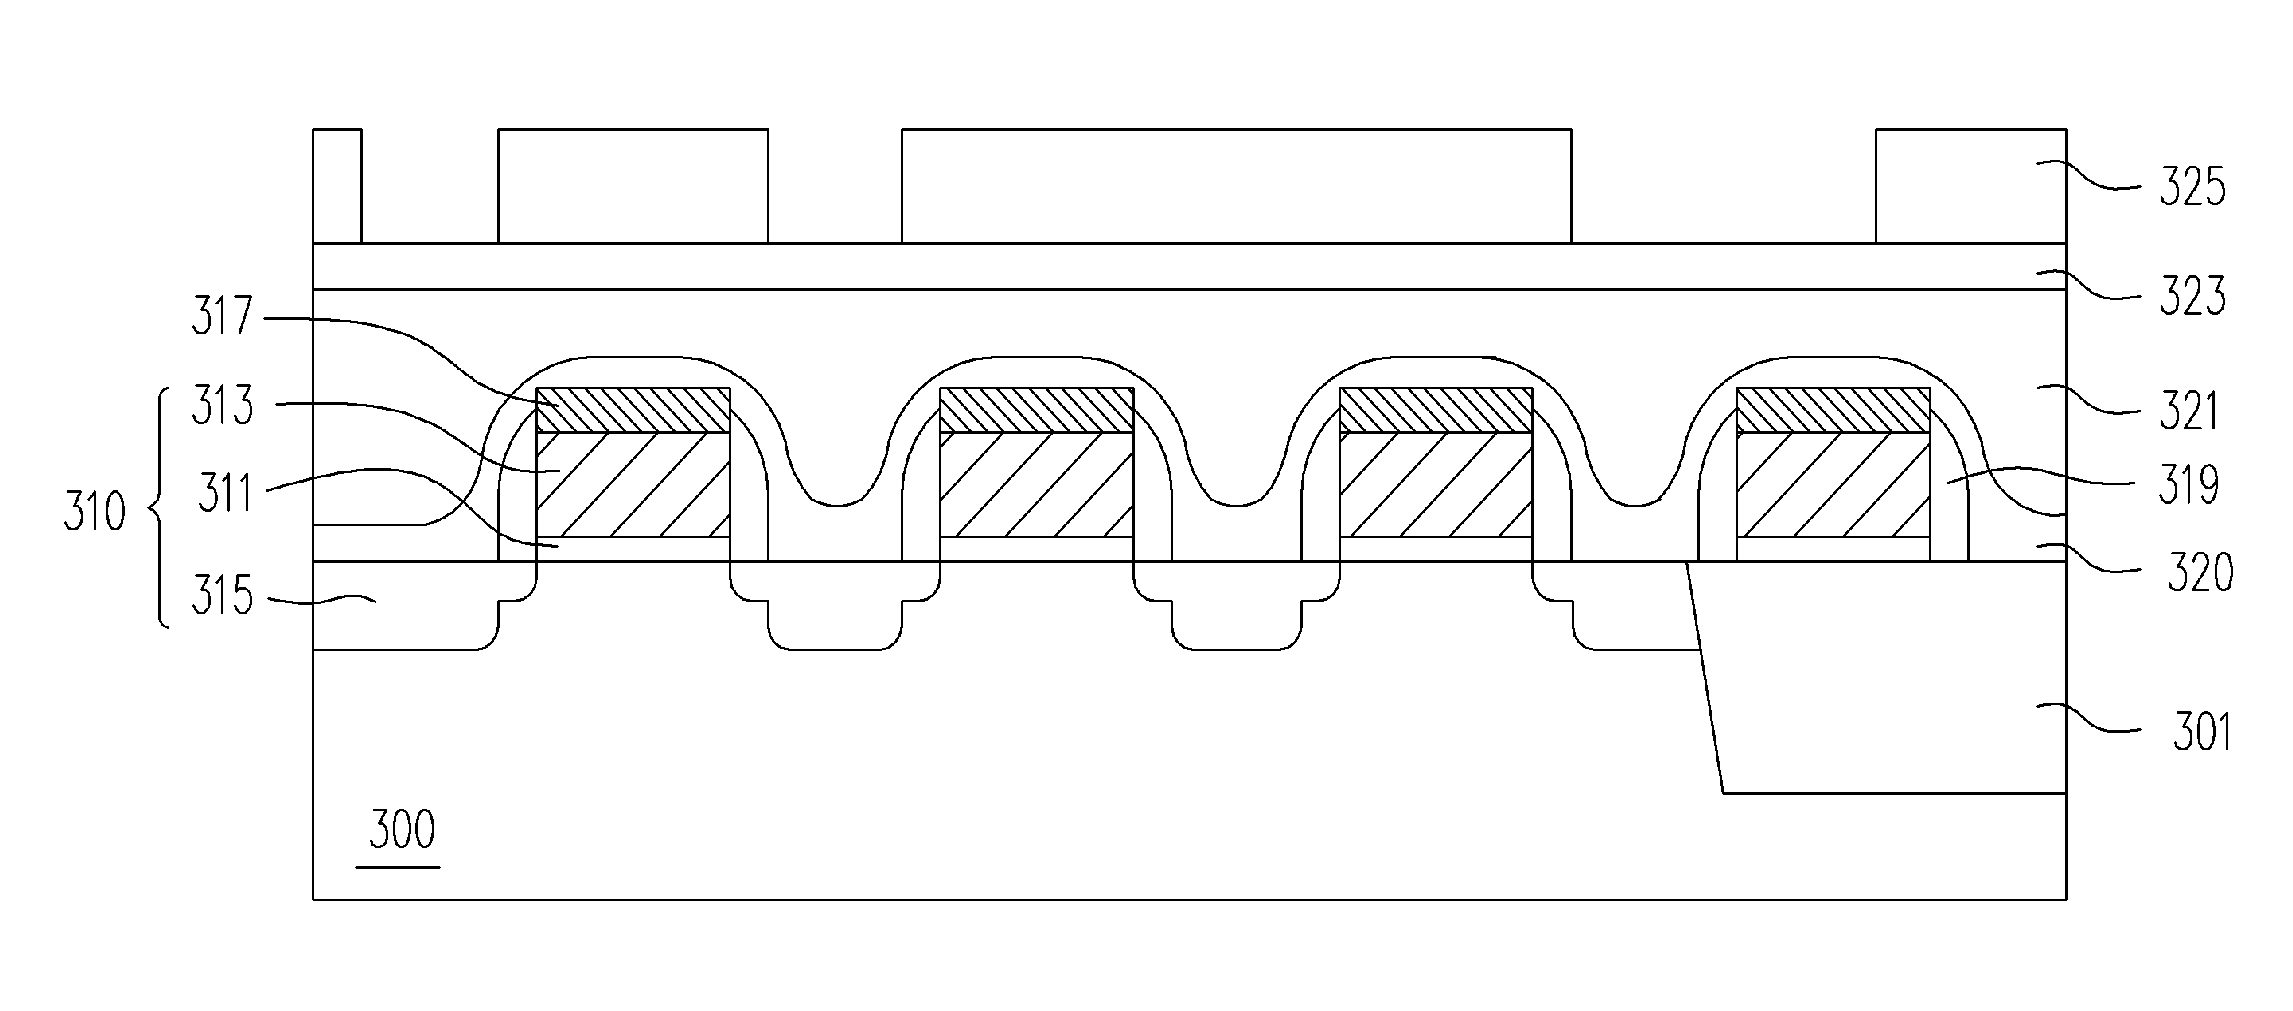 Fabricating method of an interconnect structure